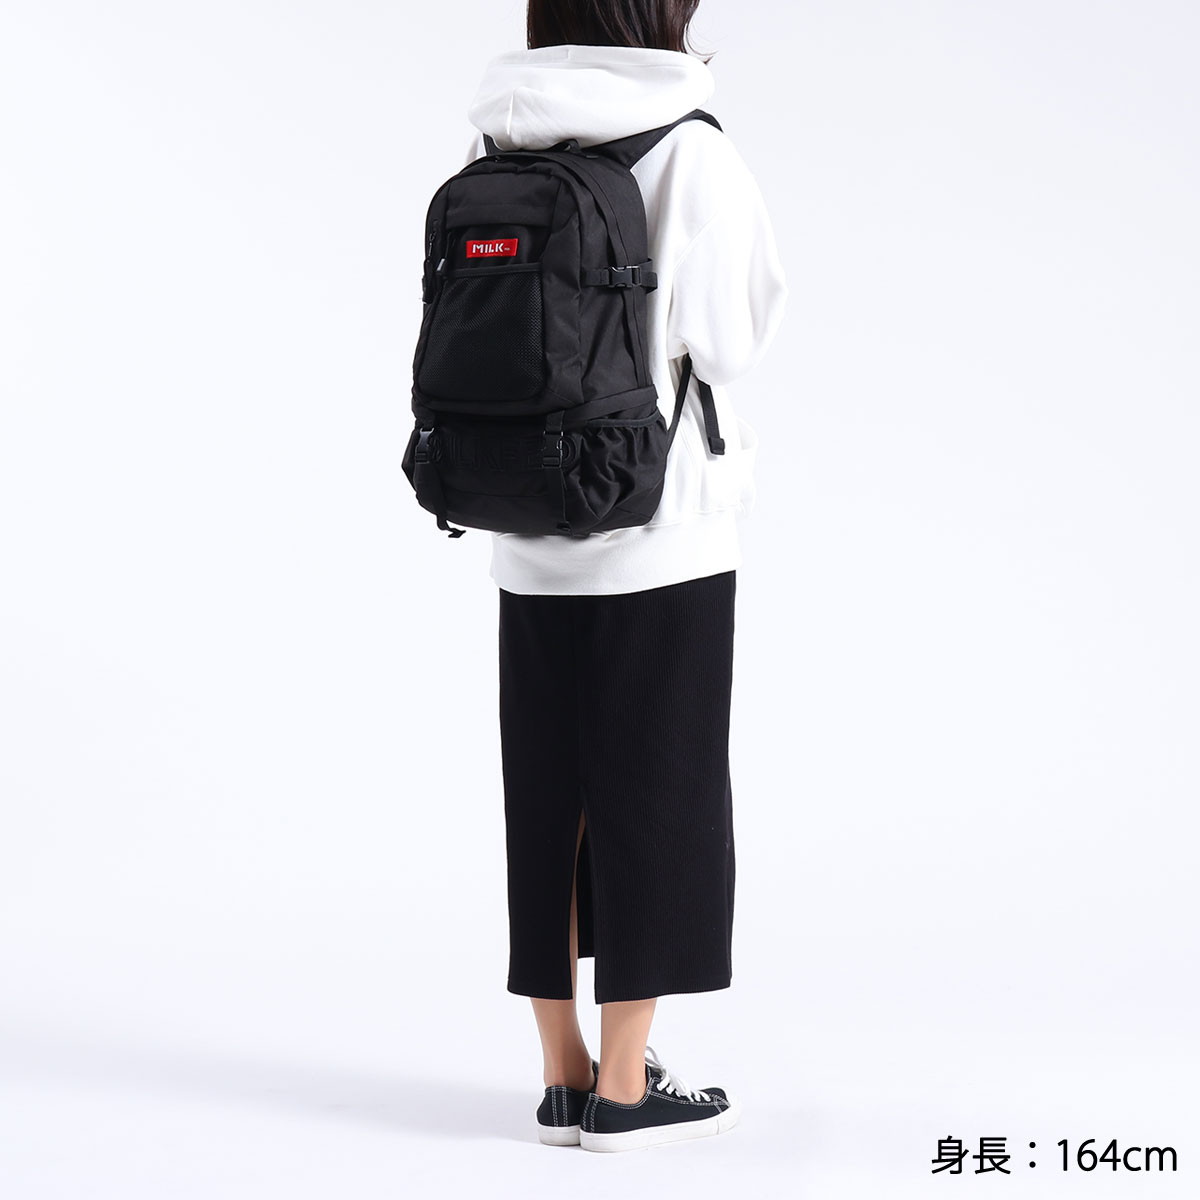 MILKFED. ミルクフェド EMBROIDERY BIG BACKPACK BAR バックパック 23L